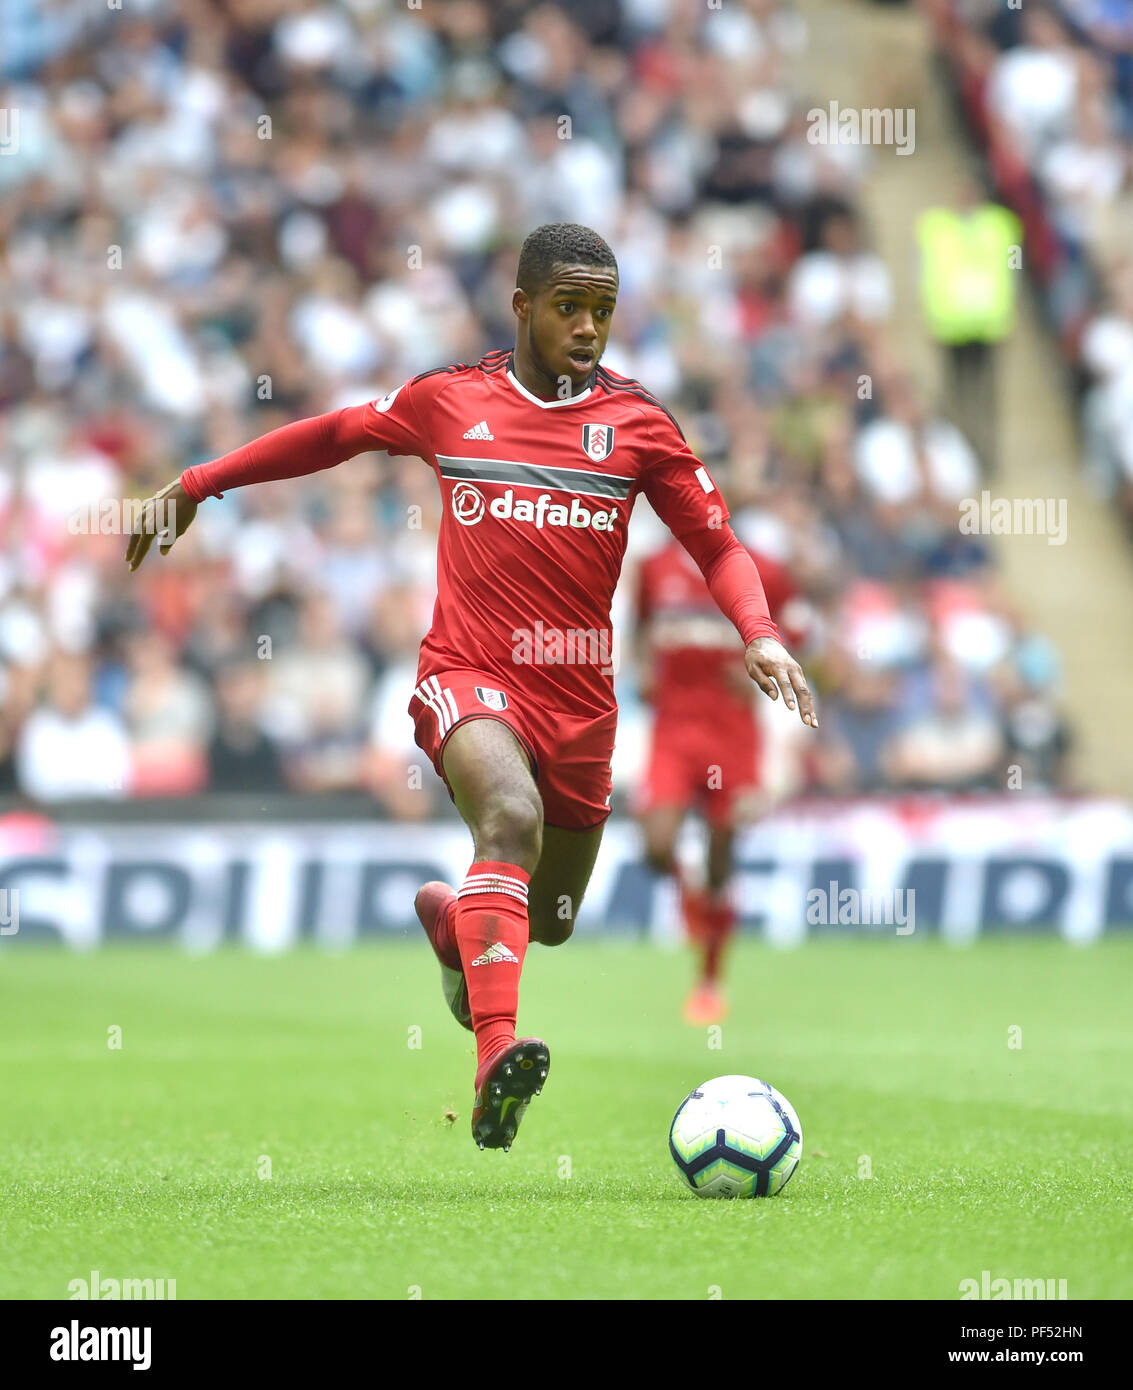 Ryan Sessegnon of Fulham during the Premier League match between Tottenham Hotspur and Fulham at Wembley Stadium in London. 18 Aug 2018 Editorial use only. No merchandising. For Football images FA and Premier League restrictions apply inc. no internet/mobile usage without FAPL license - for details contact Football Dataco Stock Photo